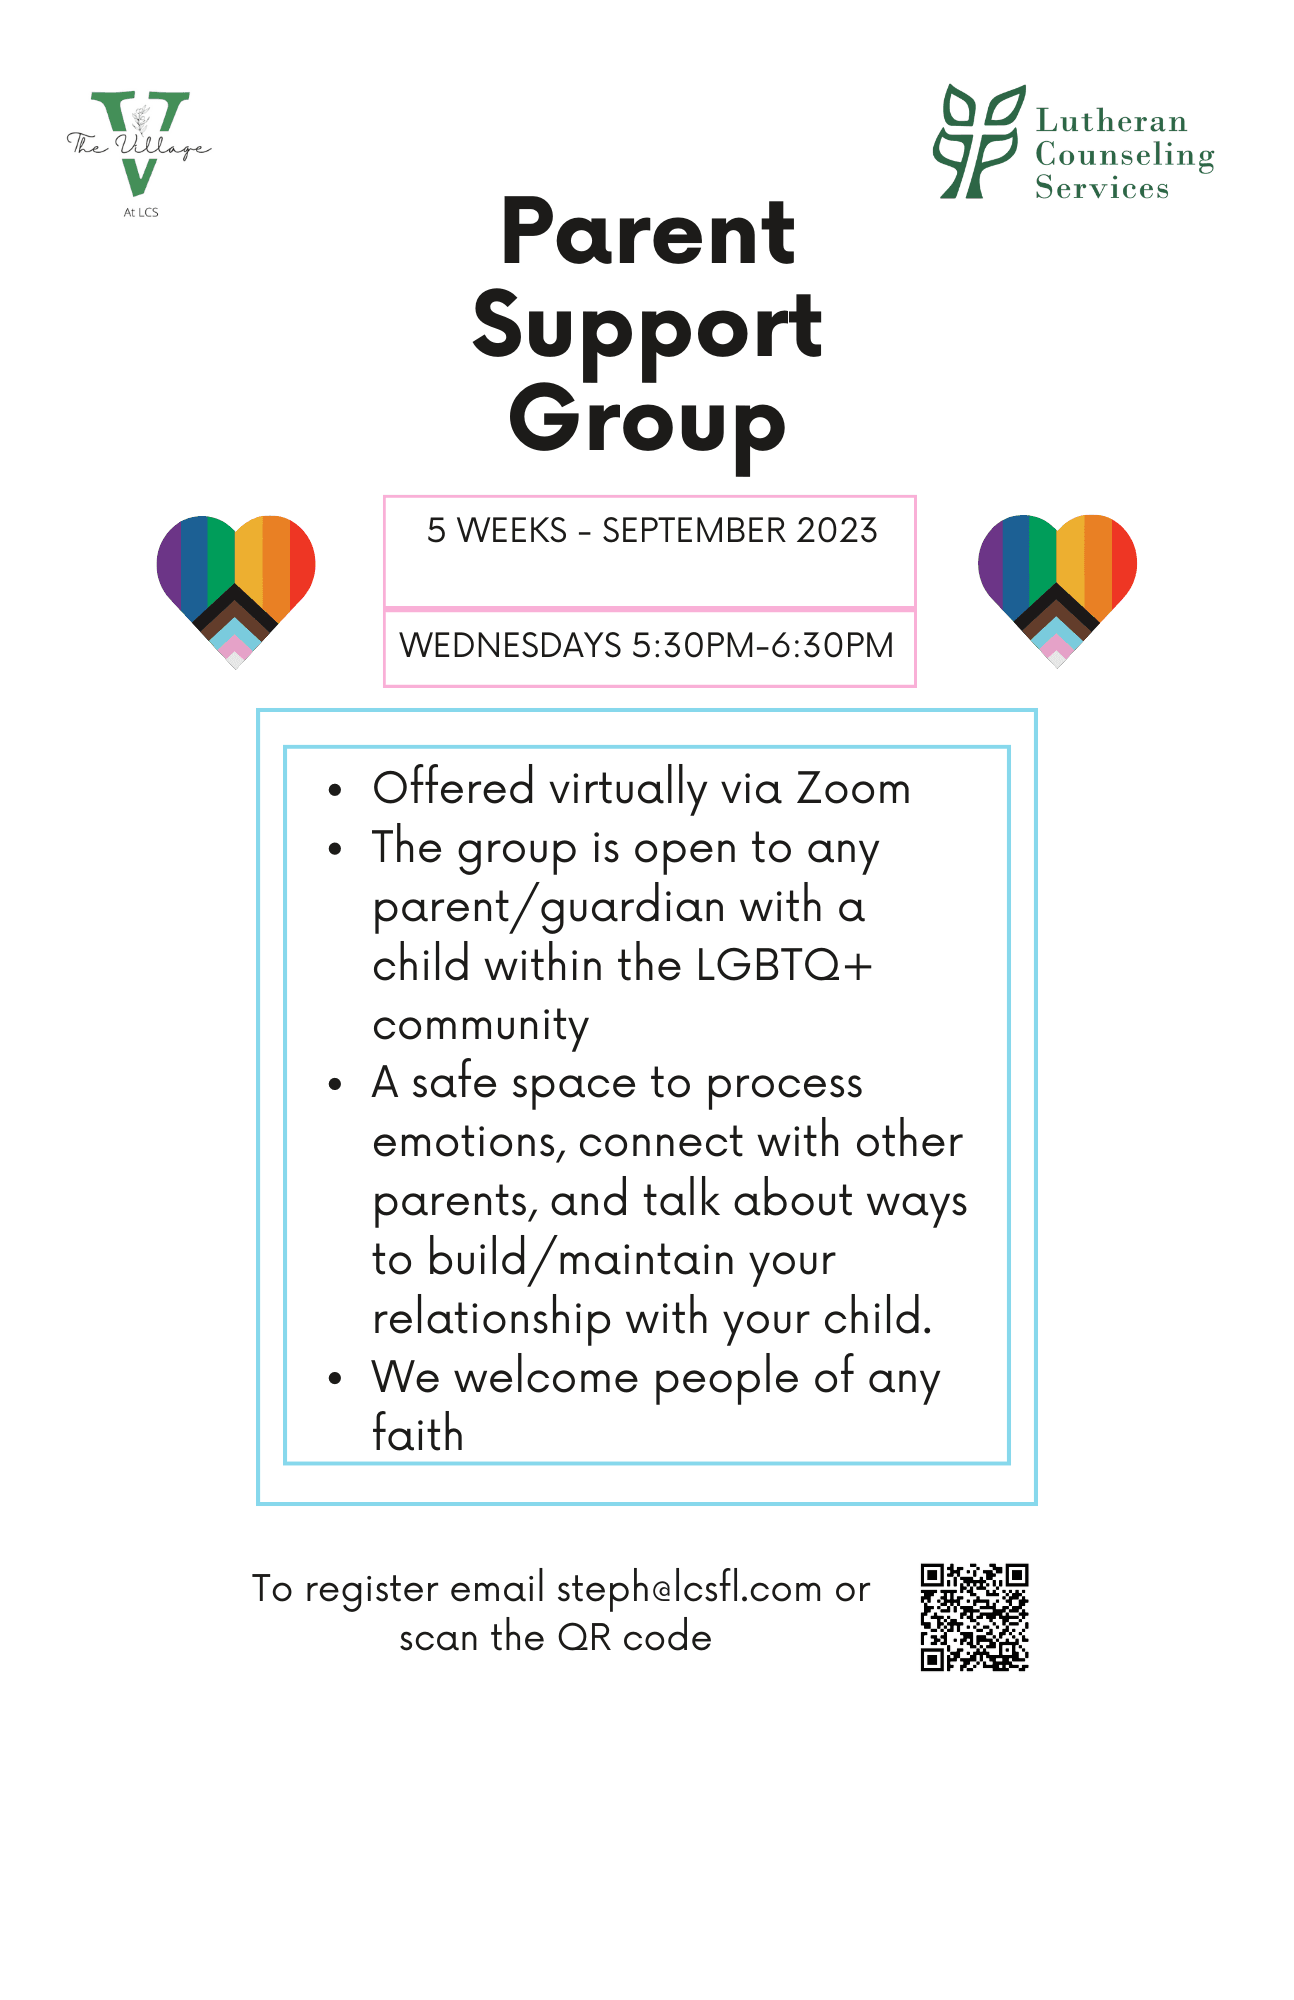 New Groups Being Offered 